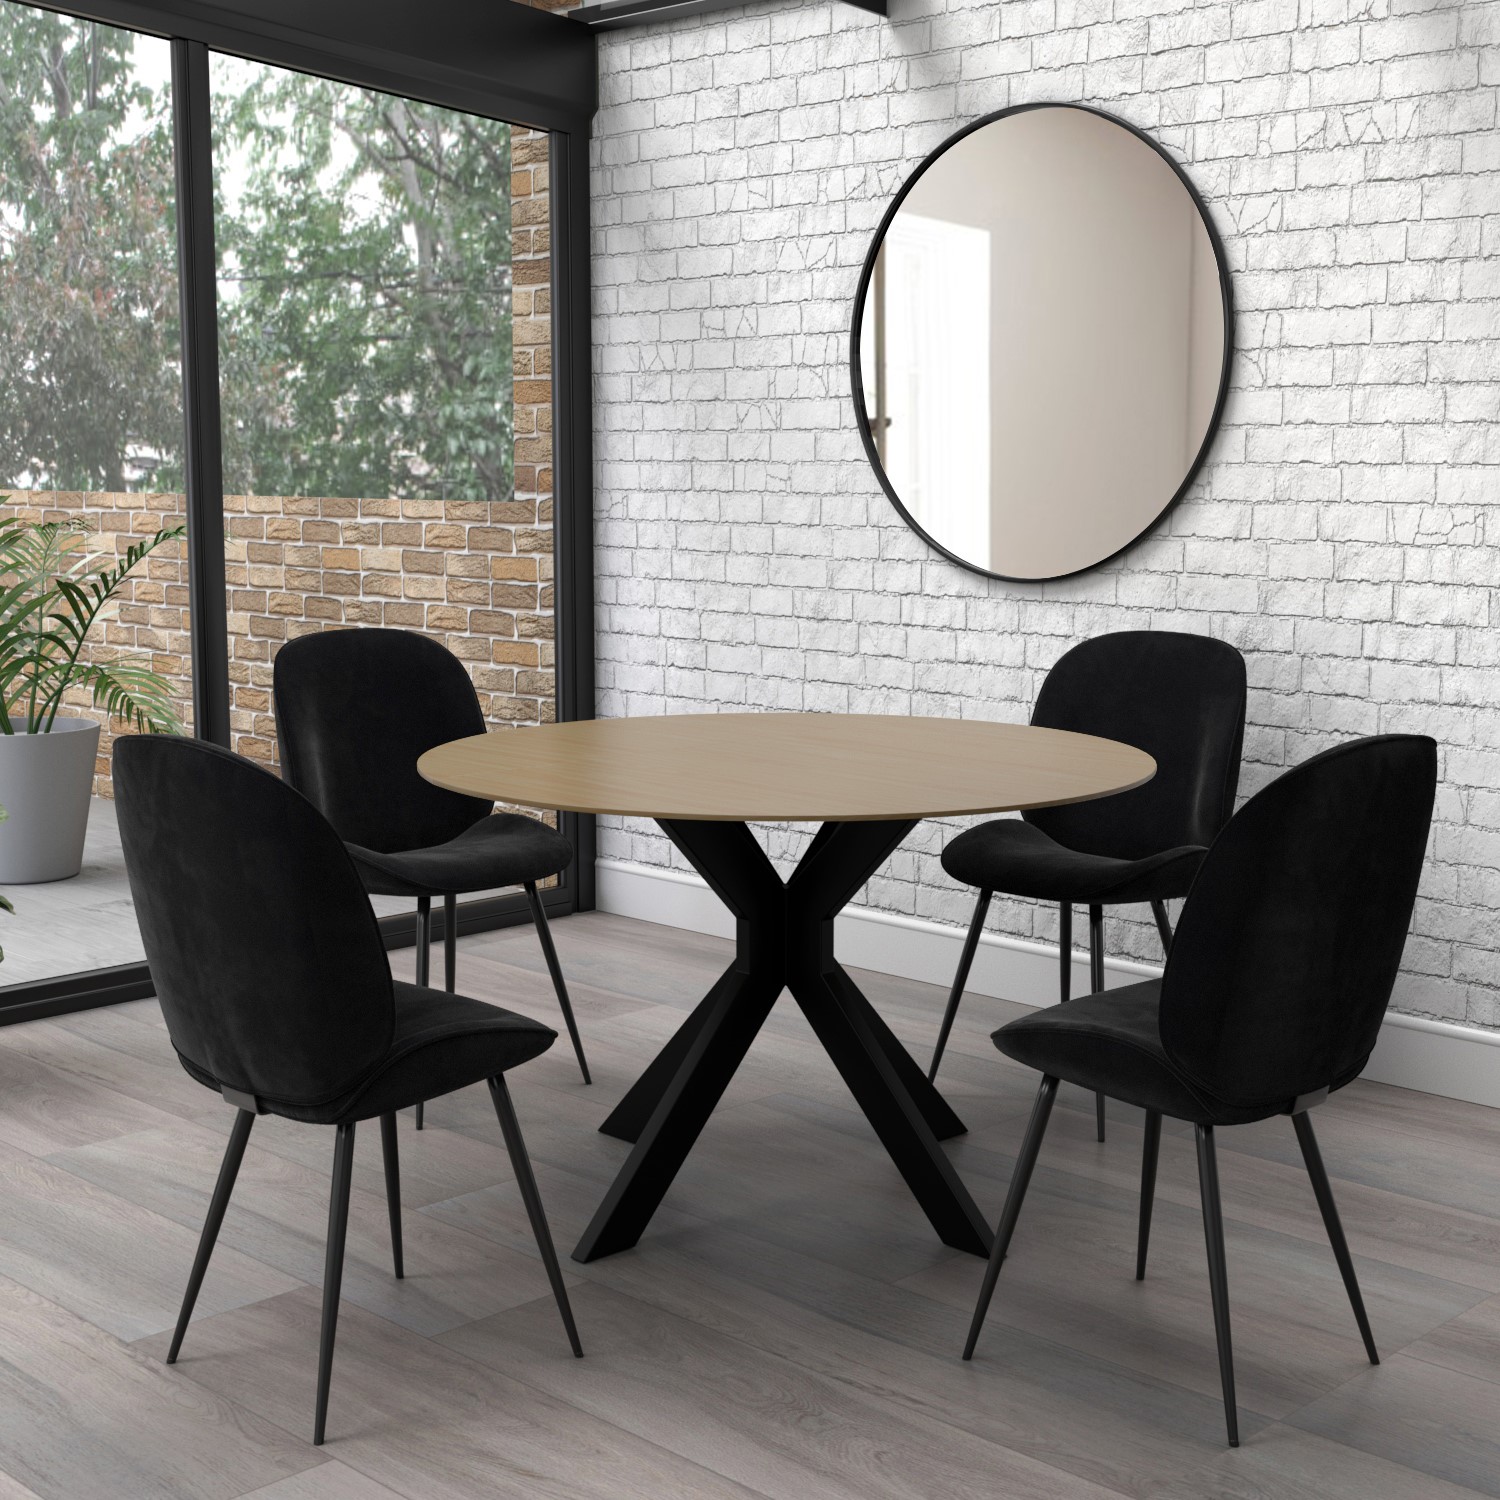 Round Light Oak Drop Leaf Dining Table, Light Oak Round Dining Table And Chairs